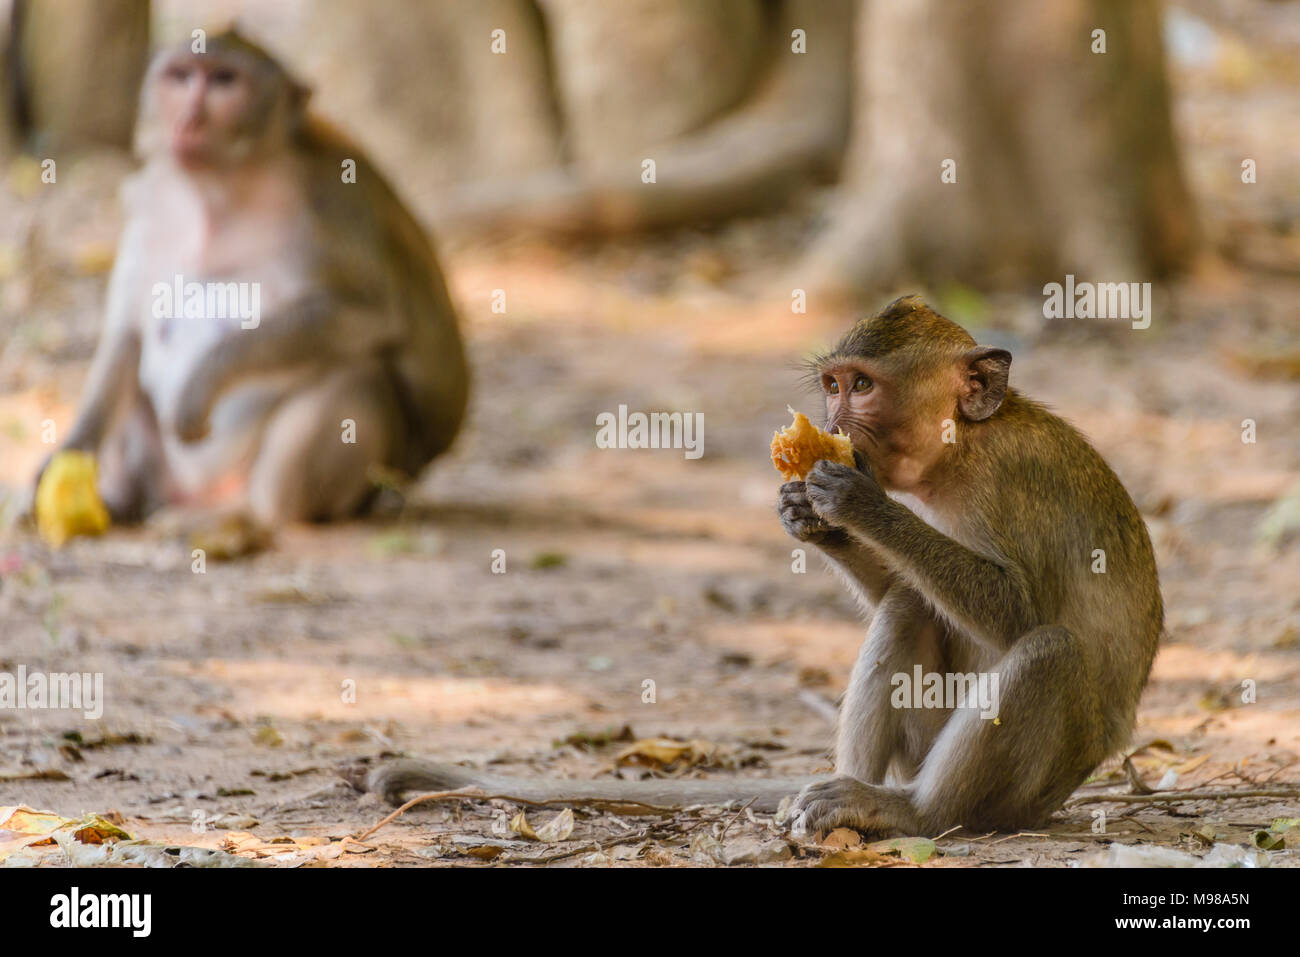 Young macquaqe monkey eating a mango left behind by tourists, Siem Reap, Cambodia Stock Photo